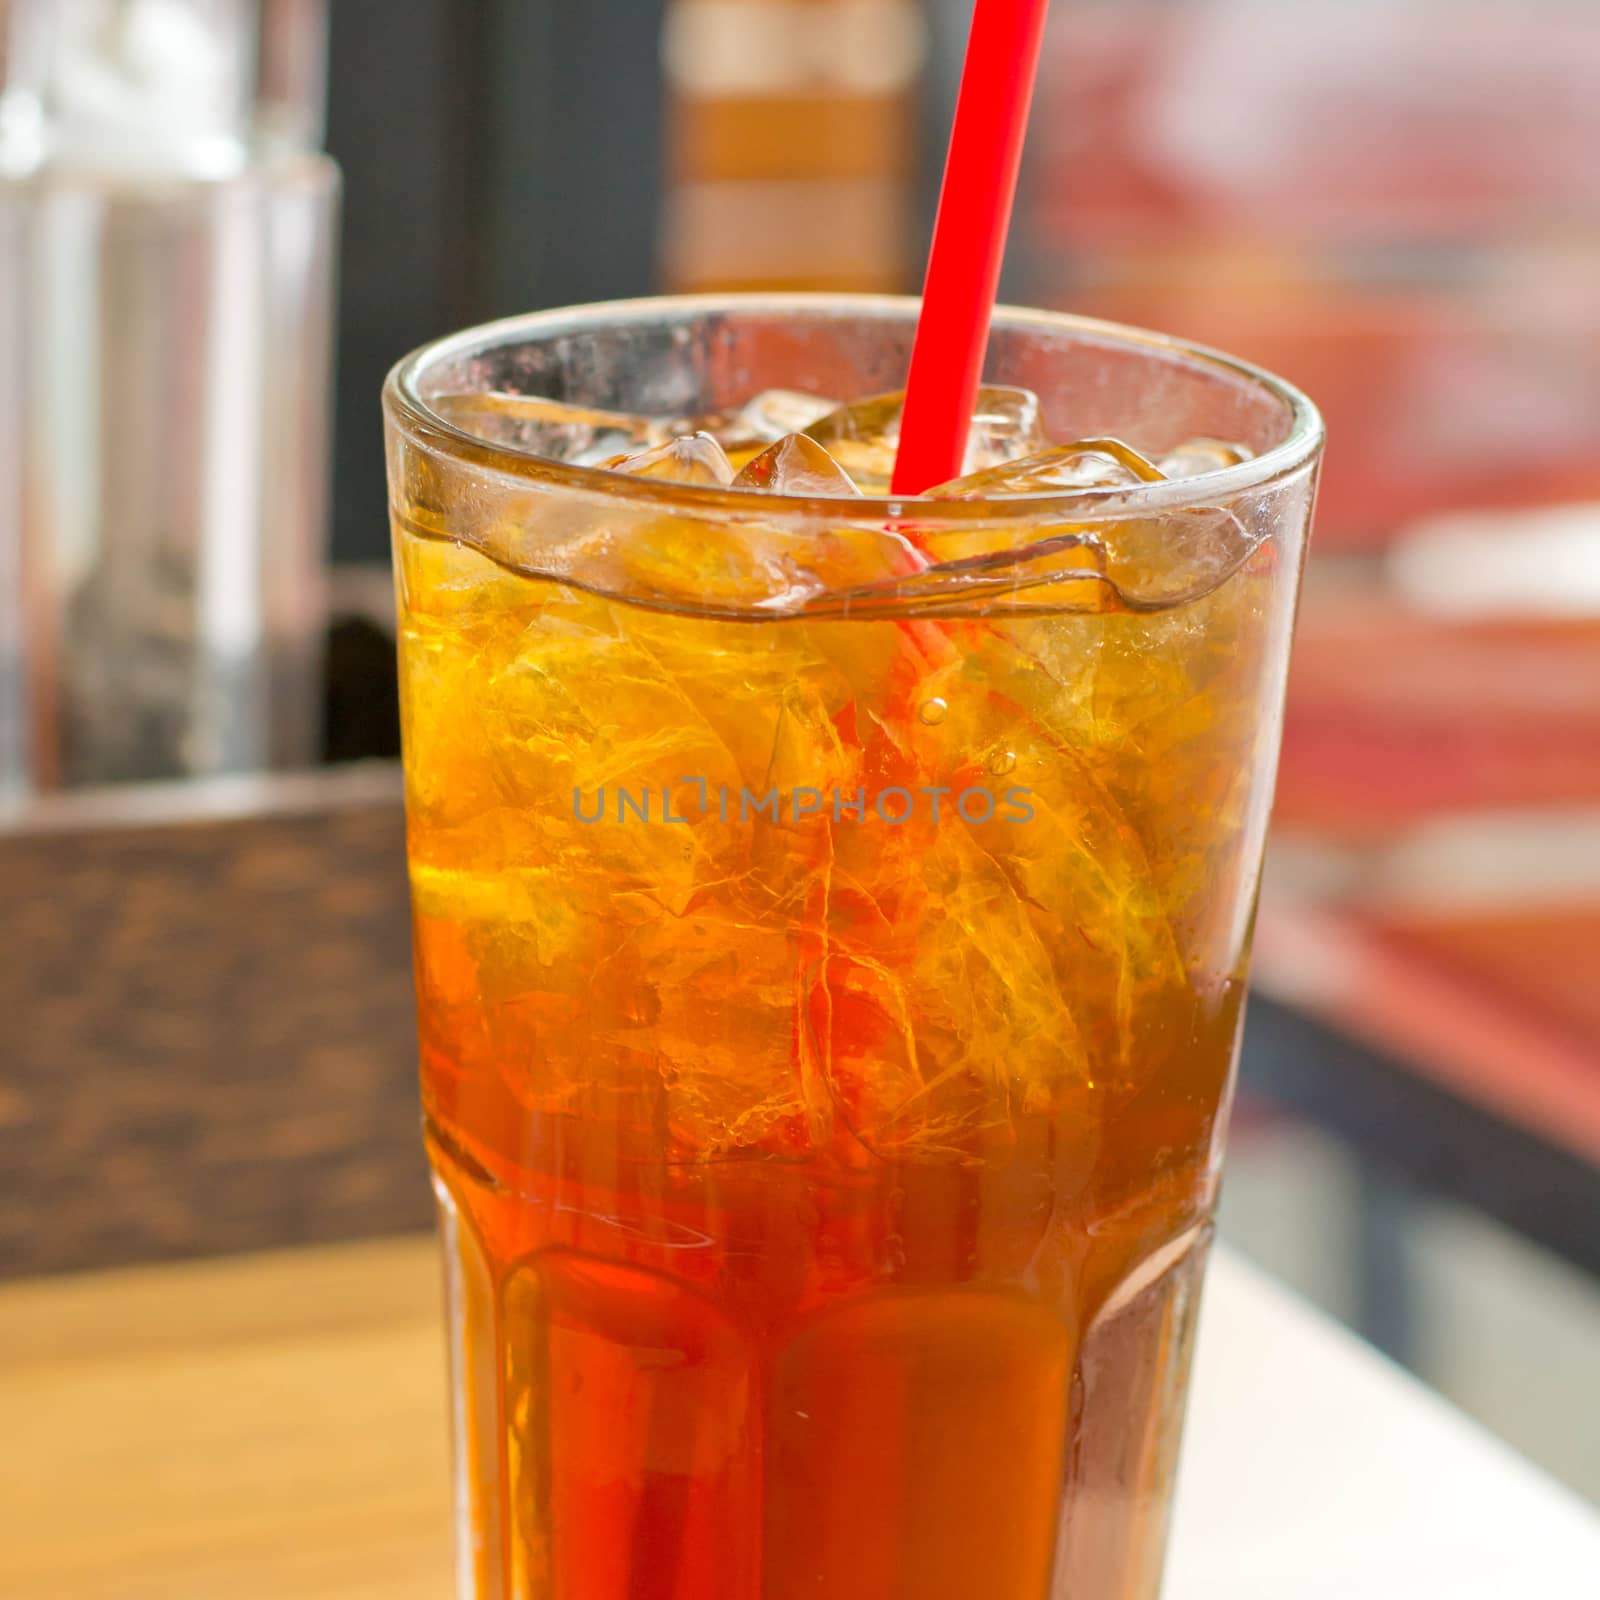 Lemon tea with ice in a glass